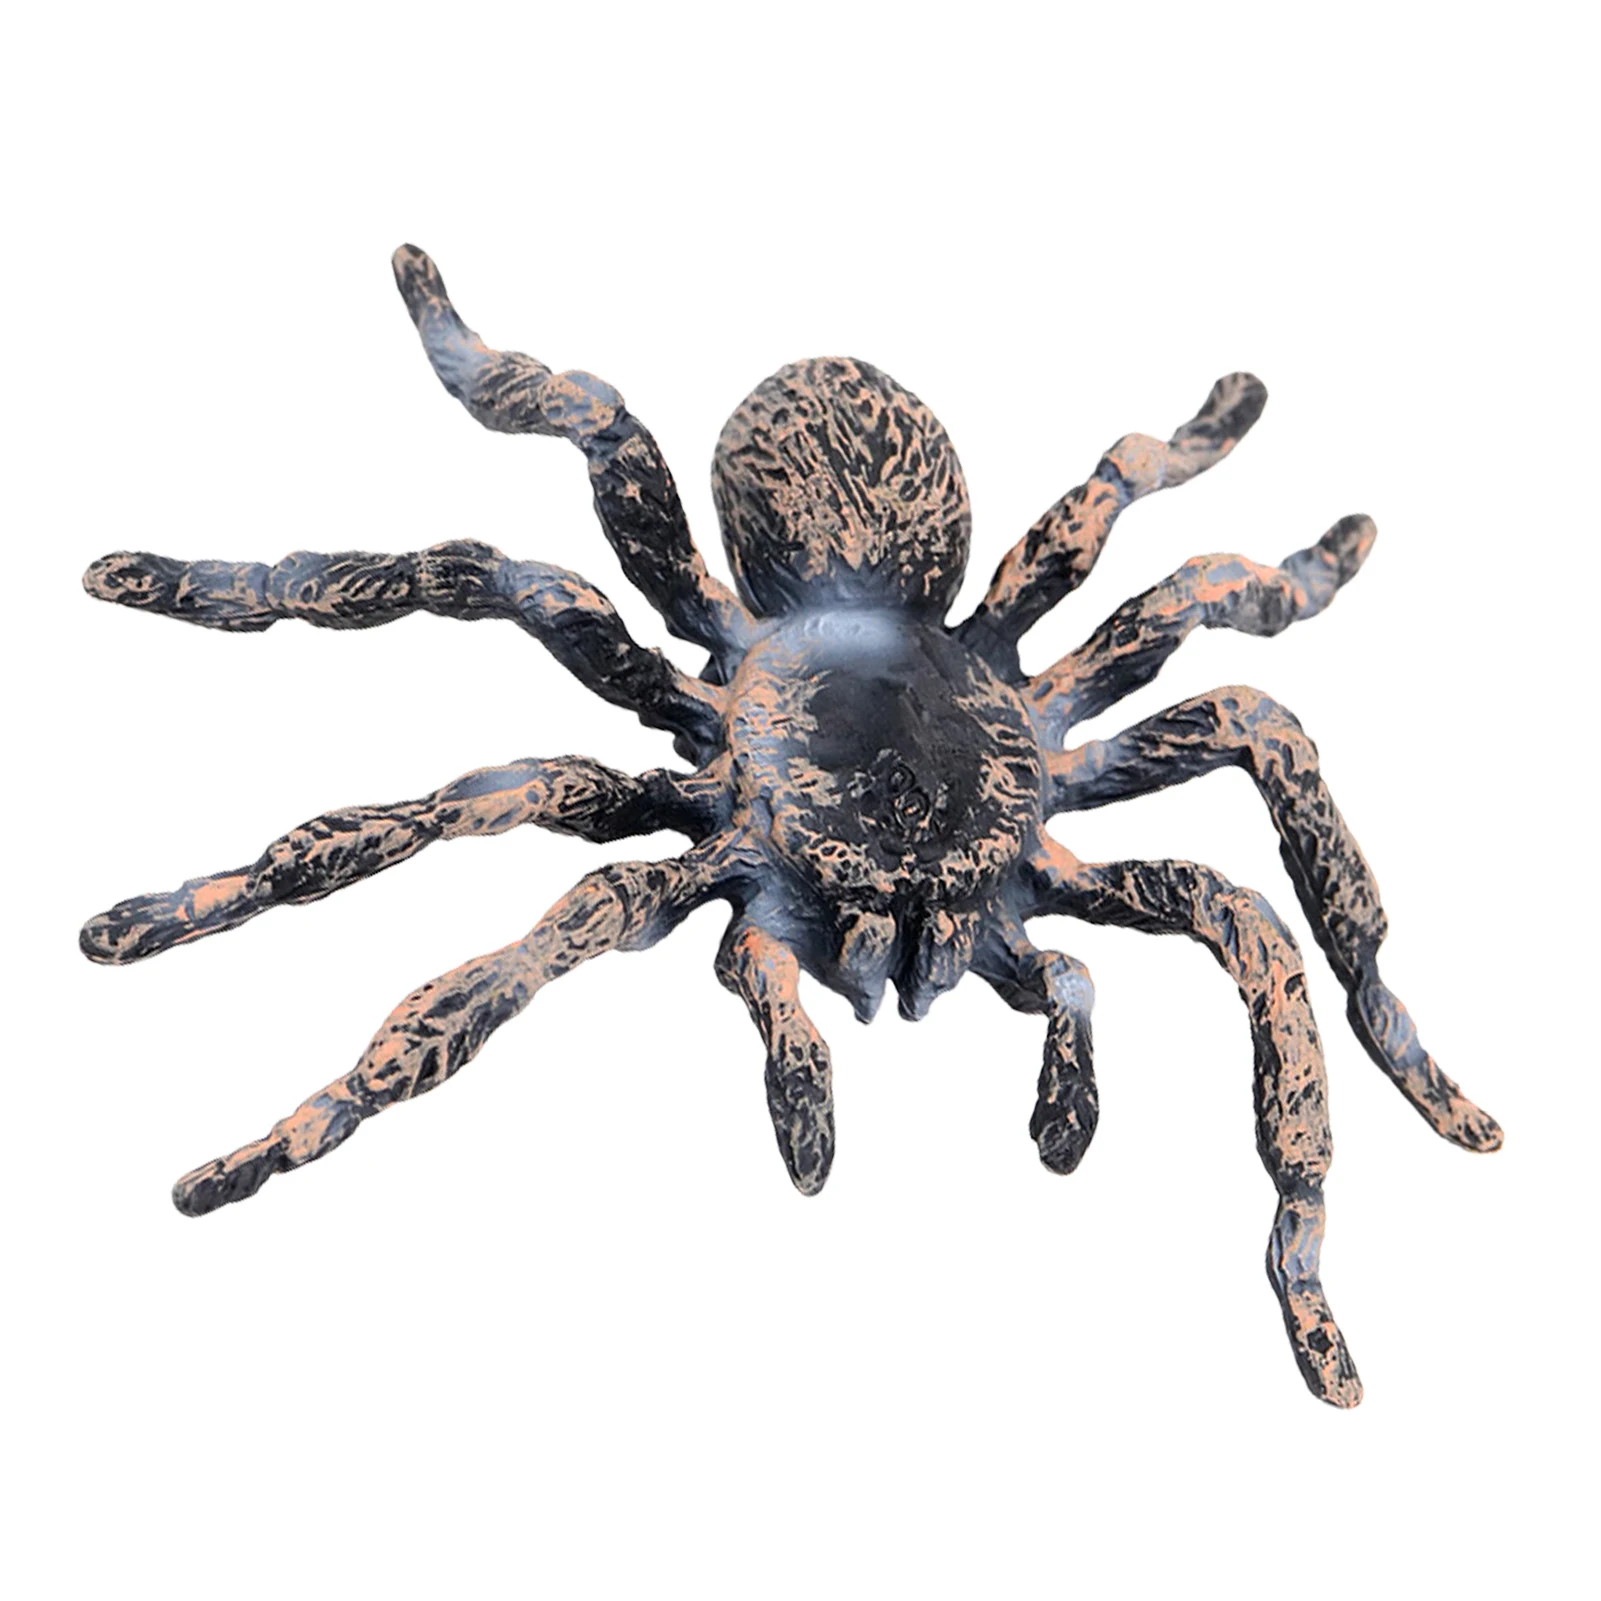 

Realistic Giant Spider Toys Giant Simulated Spiders ABS Spider Figurines For Joke Halloween Party Supply Prank Props